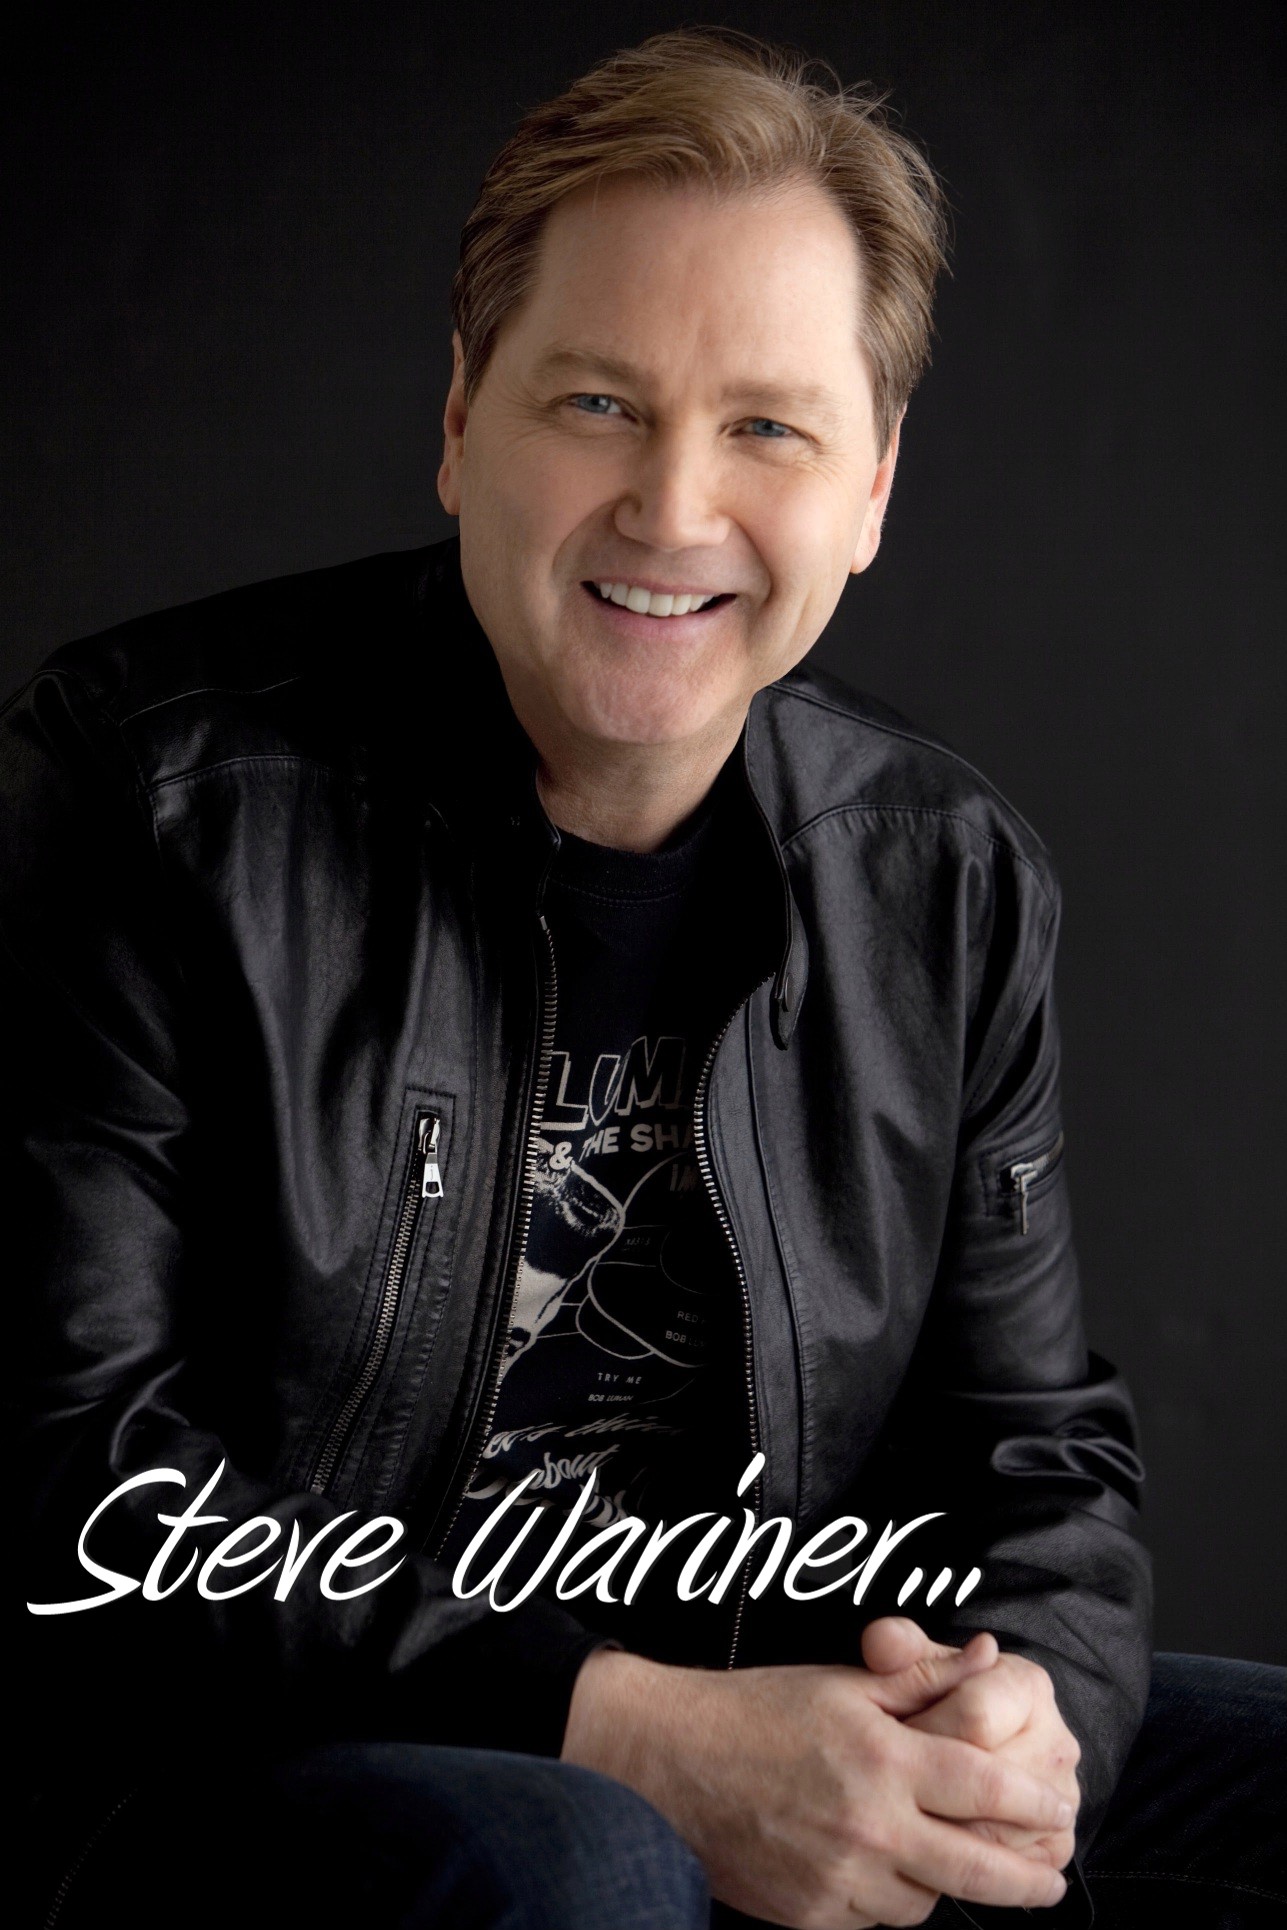 Strictly Country Magazine The Unappreciated Steve Wariner